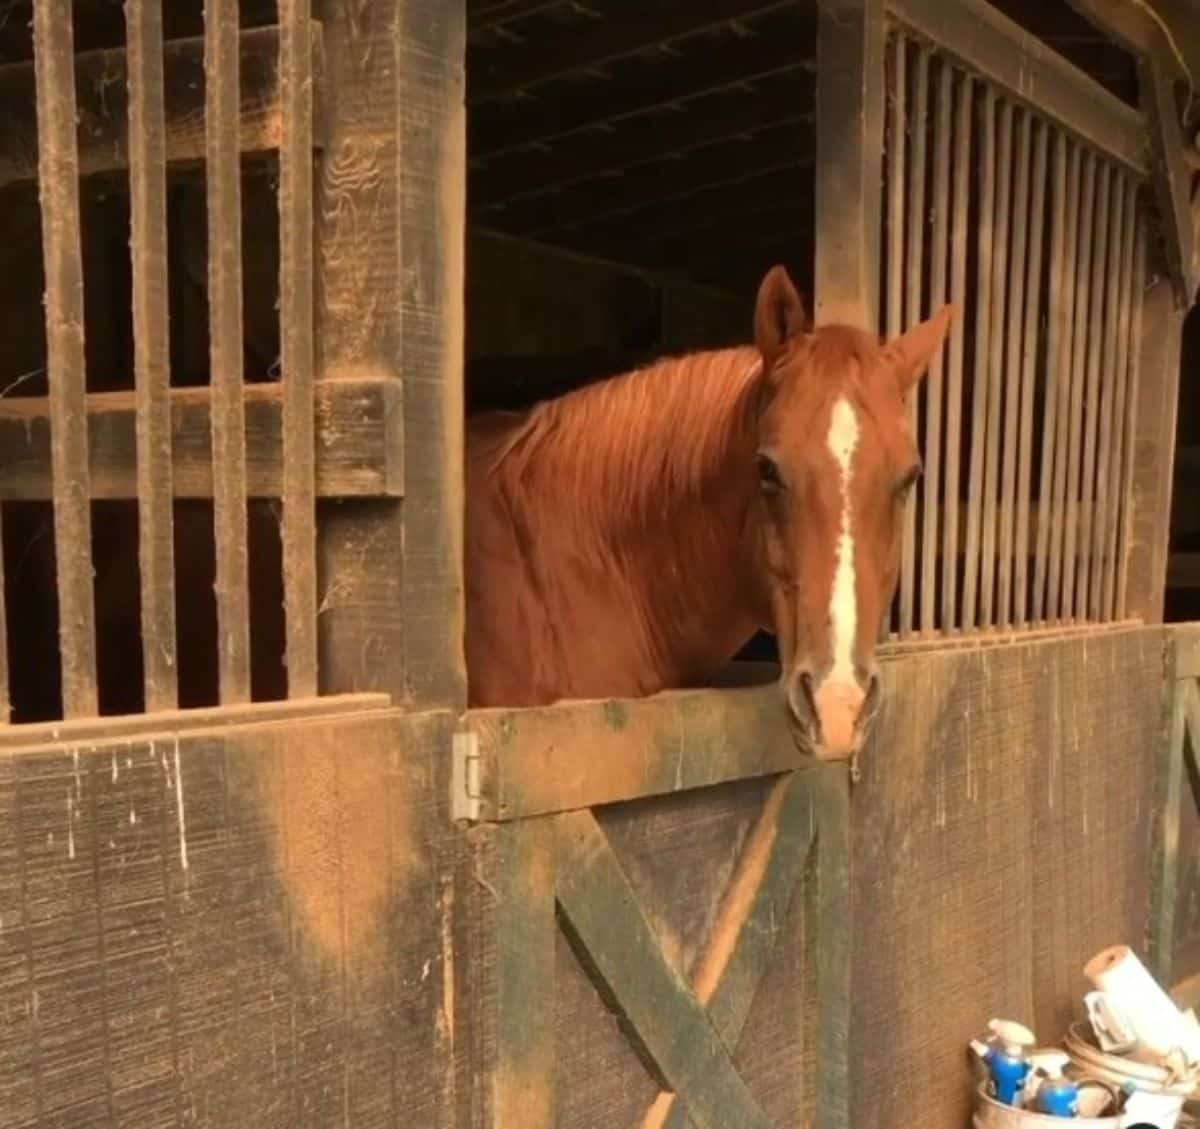 A brown horse with a white mark on a face in a wooden stable.